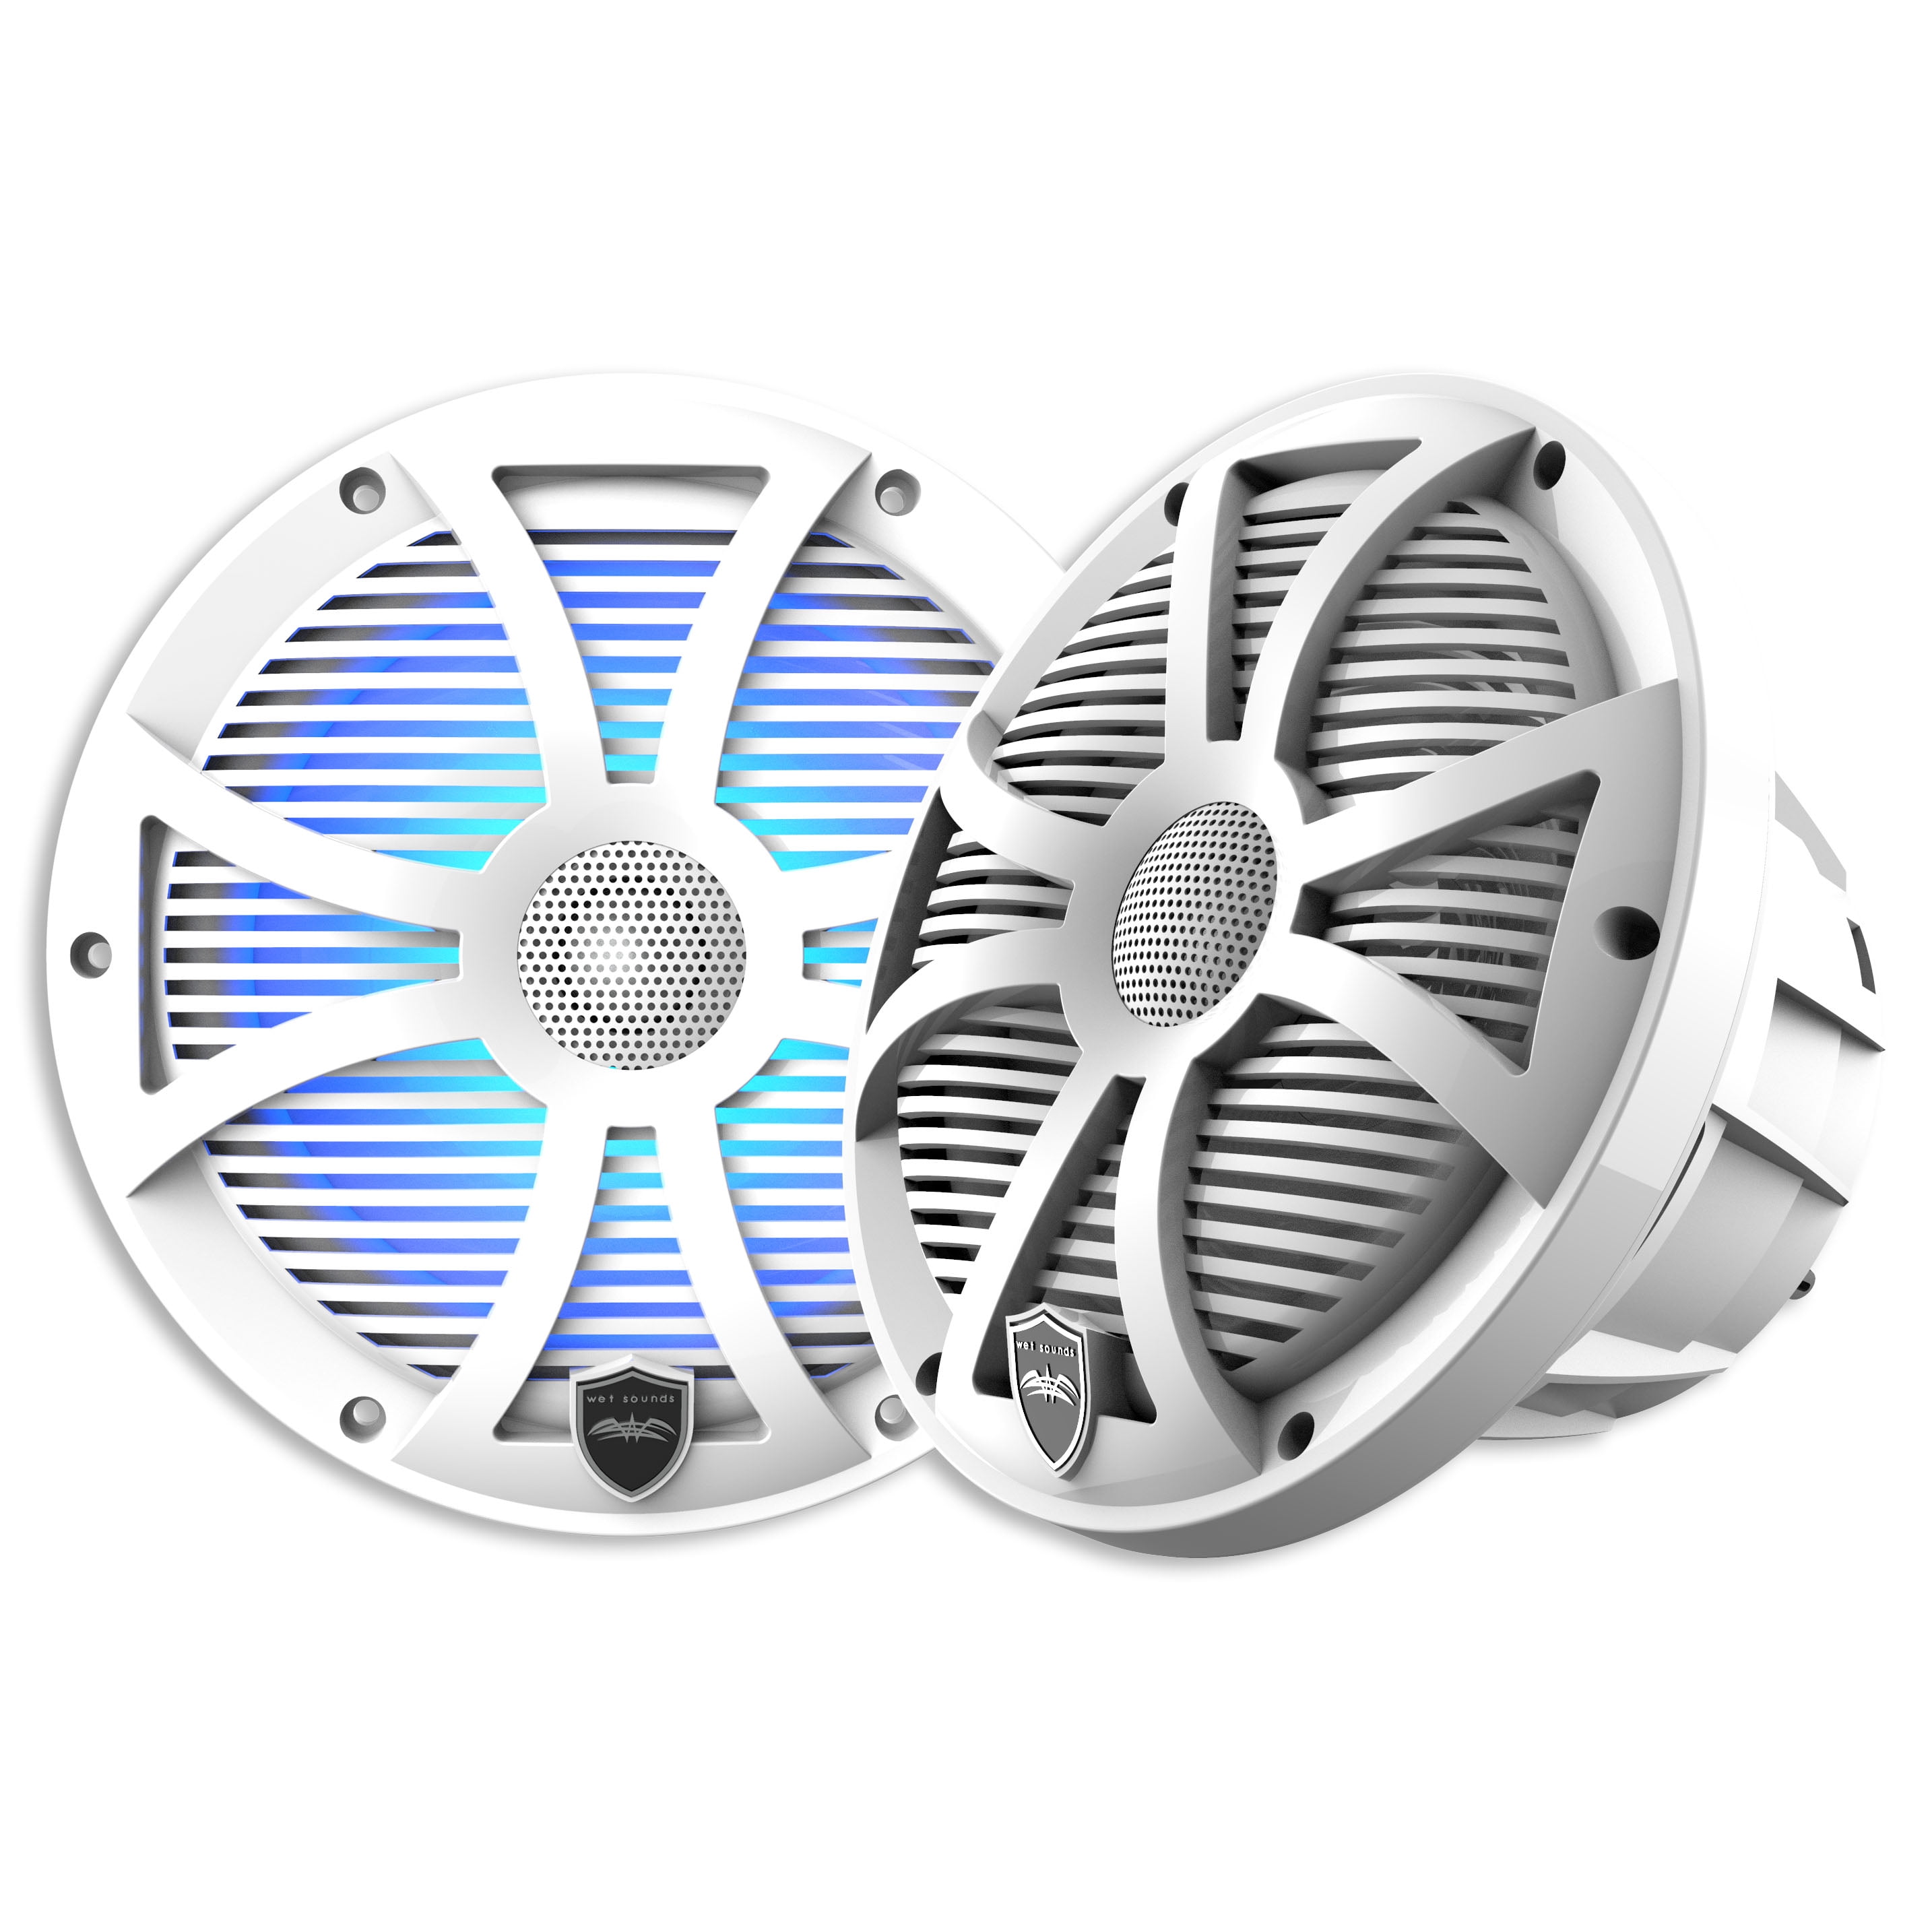 Wet Sounds REVO 8-SWW White Closed SW Grille 8 Inch Marine LED Coaxial